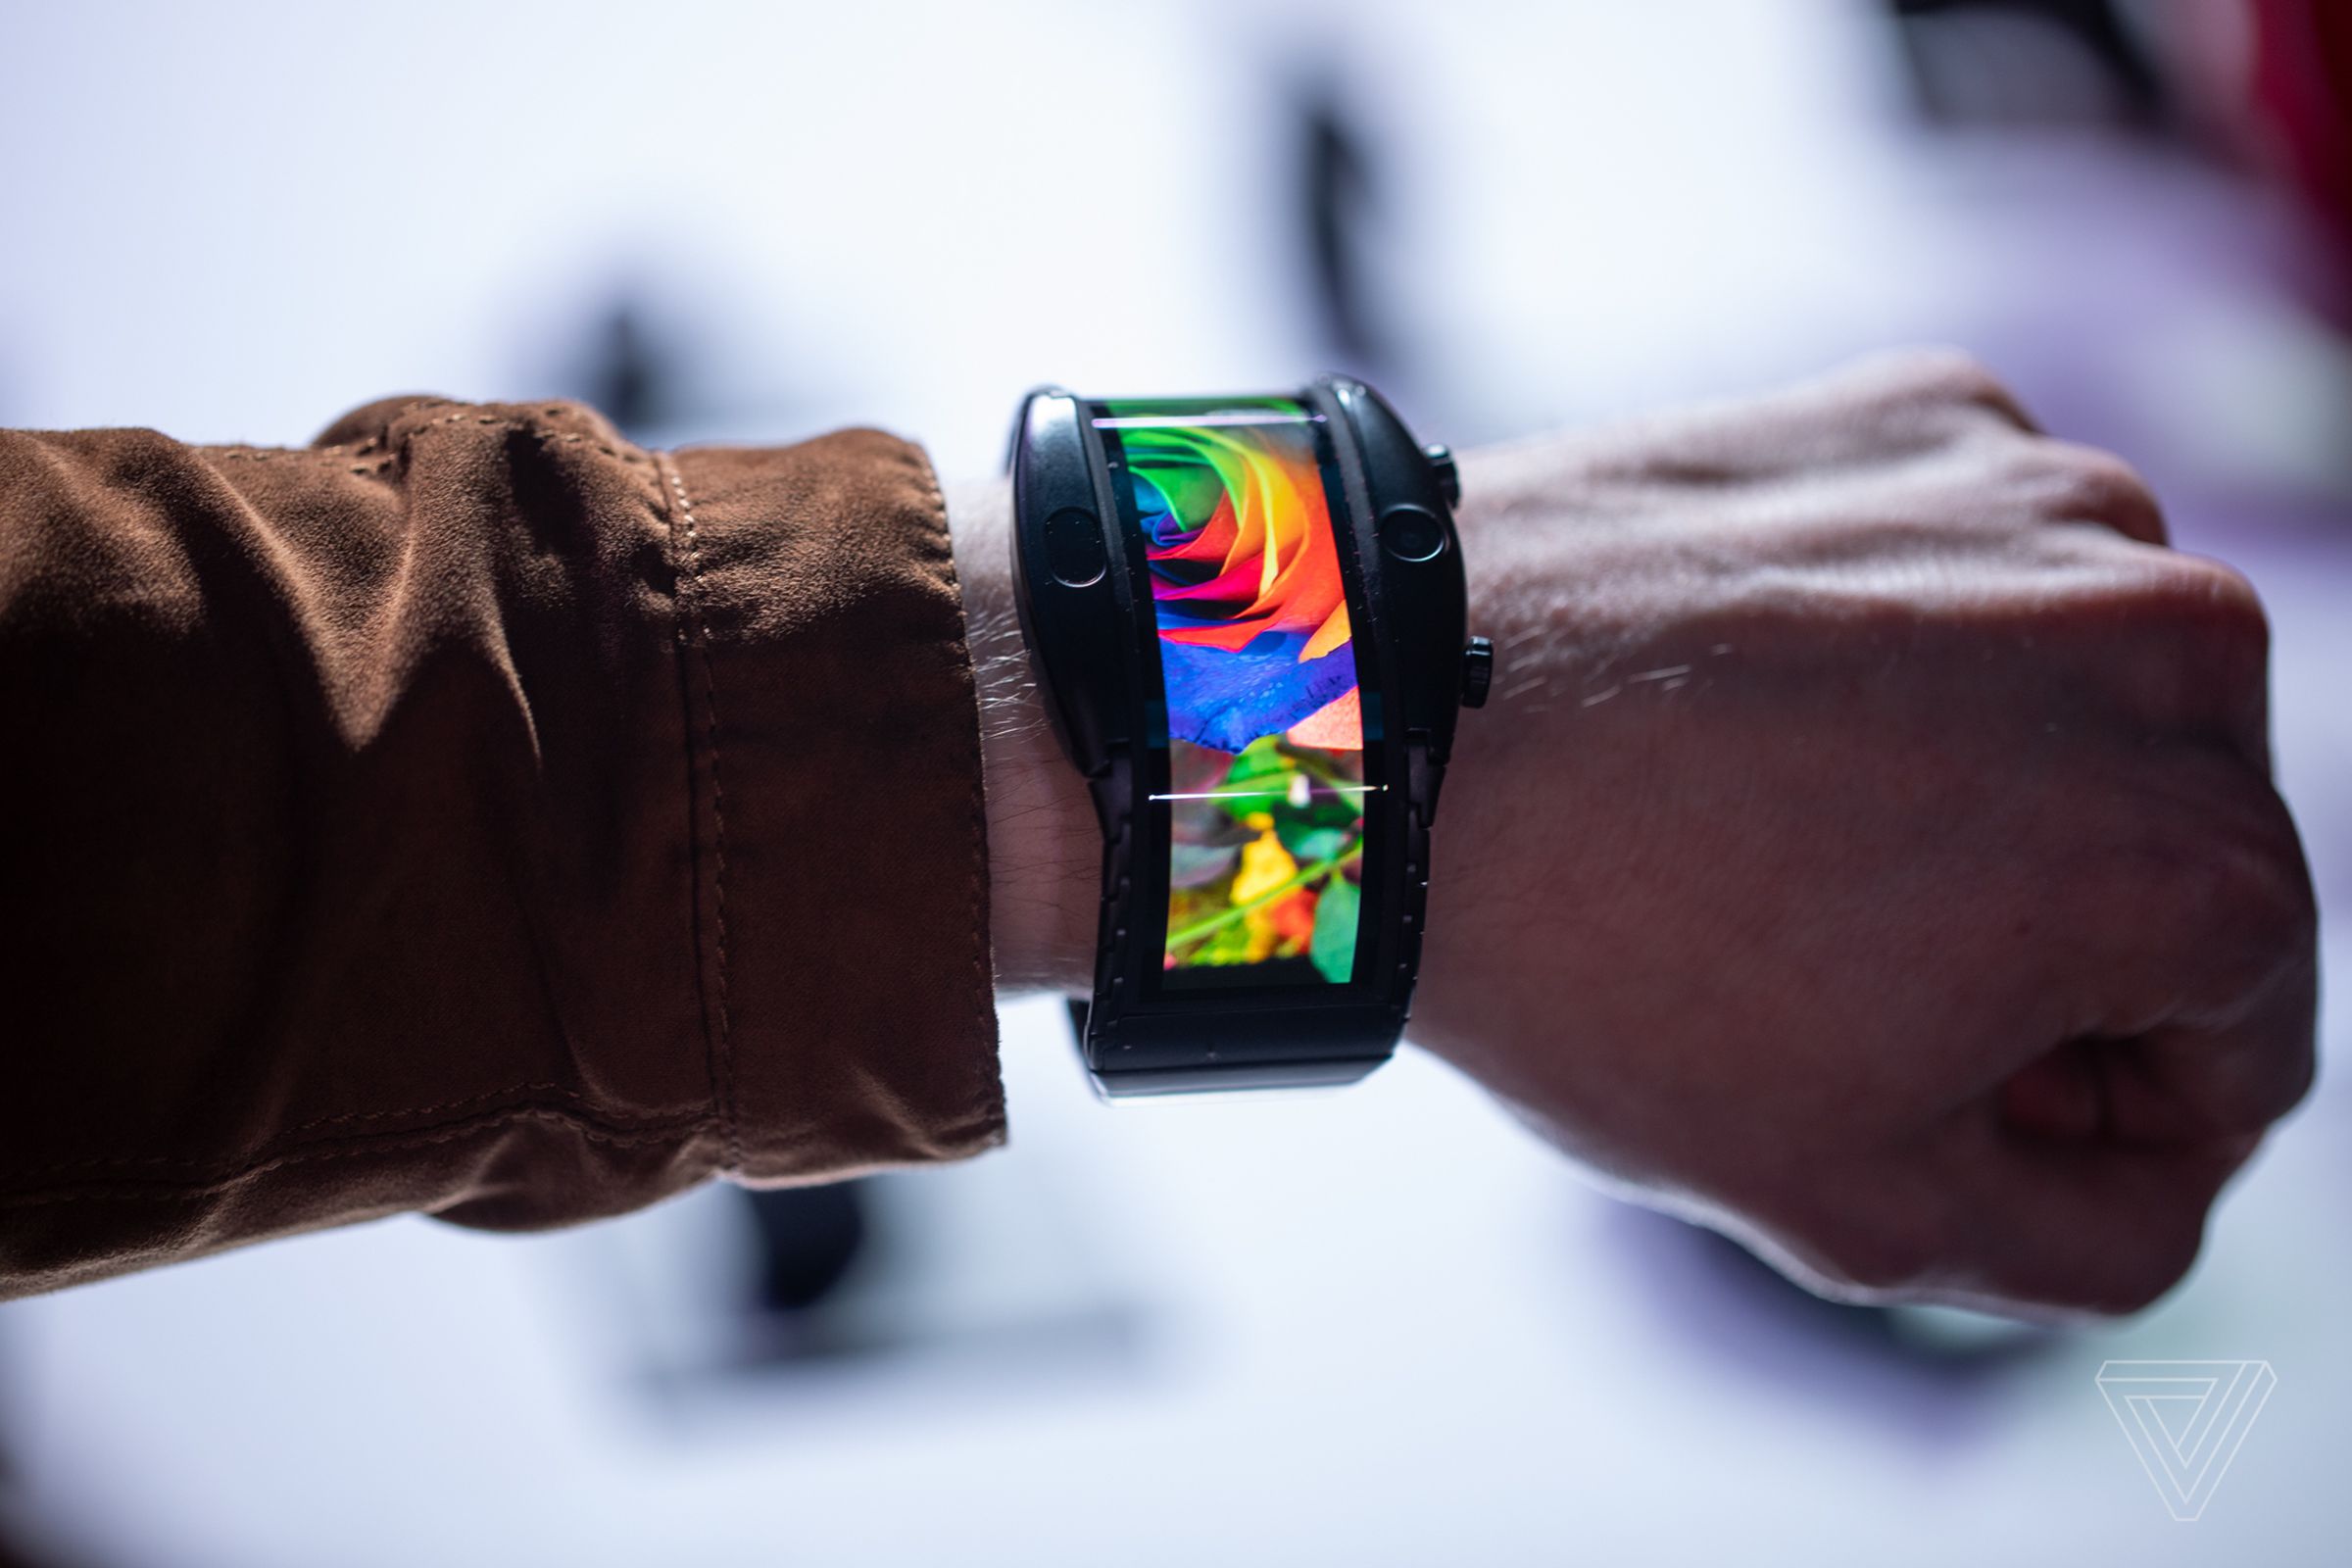 Because the wearable has an OLED display, the colors appear vibrant and bright. 